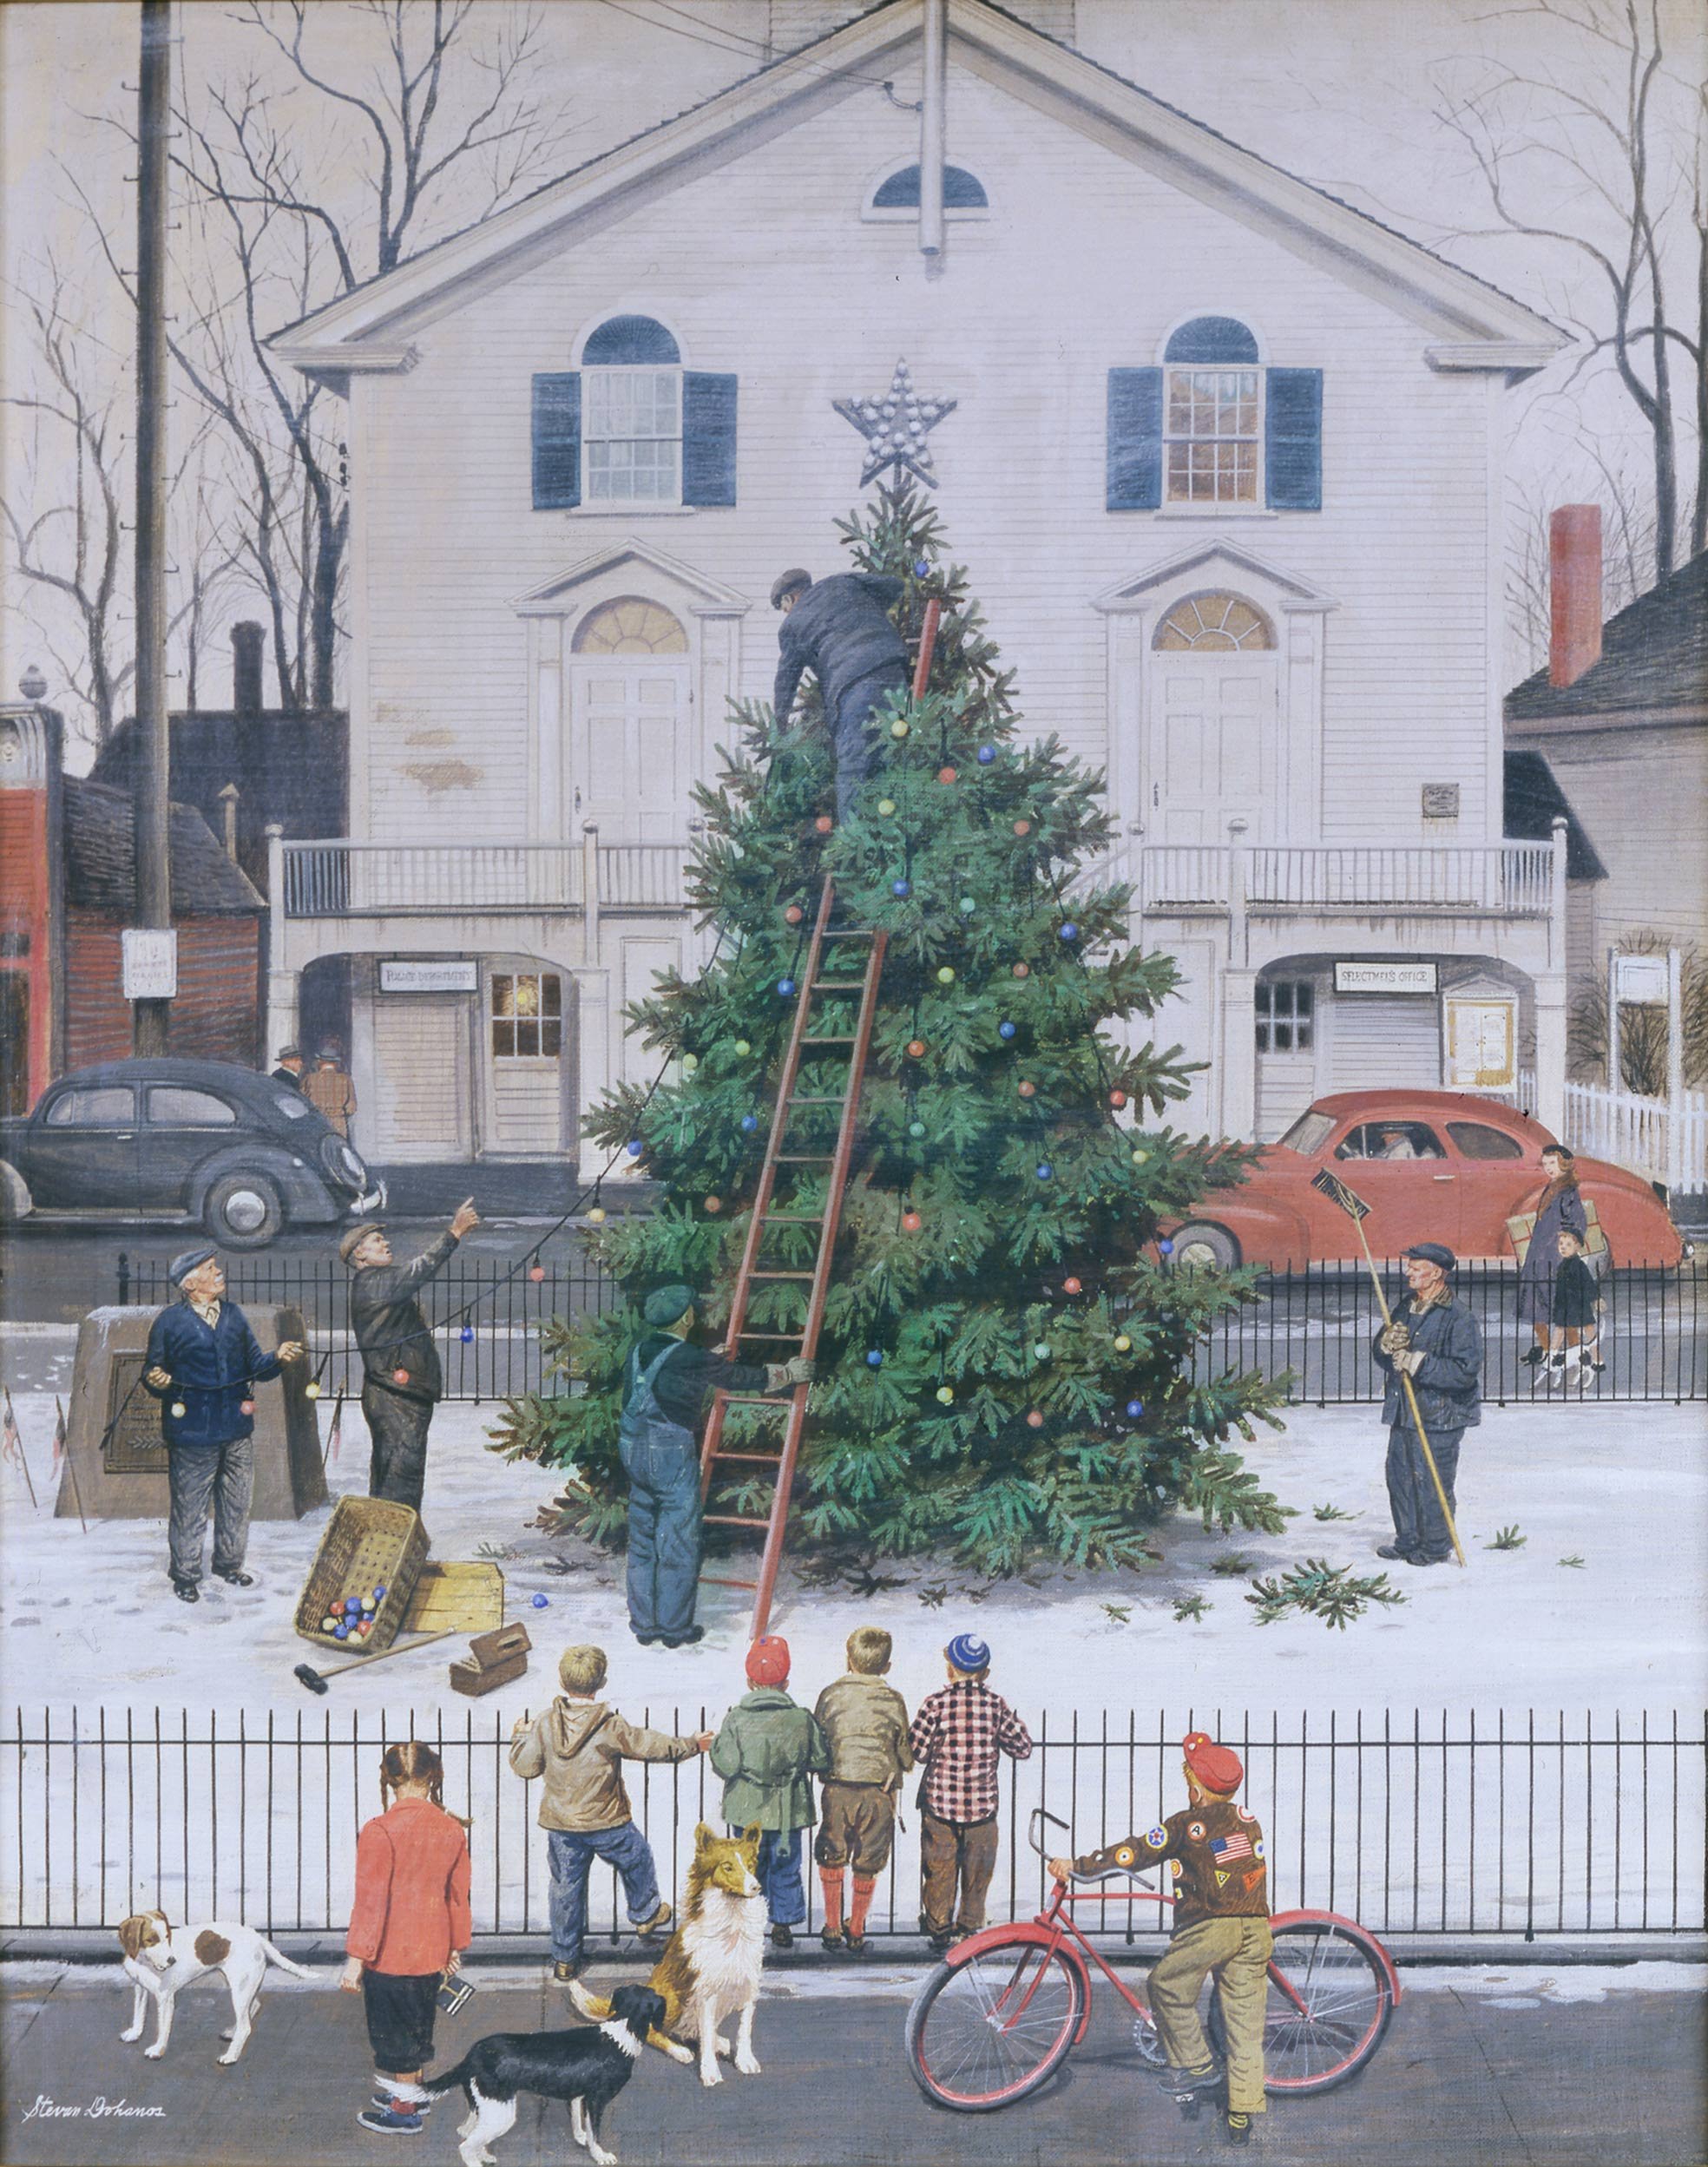   Stevan Dohanos (1907-1994)   Community Tree  1948, gouache on canvas 30 1/8” x 24 1/8”, signed lower left  Saturday Evening Post,  December 4, 1948 cover 